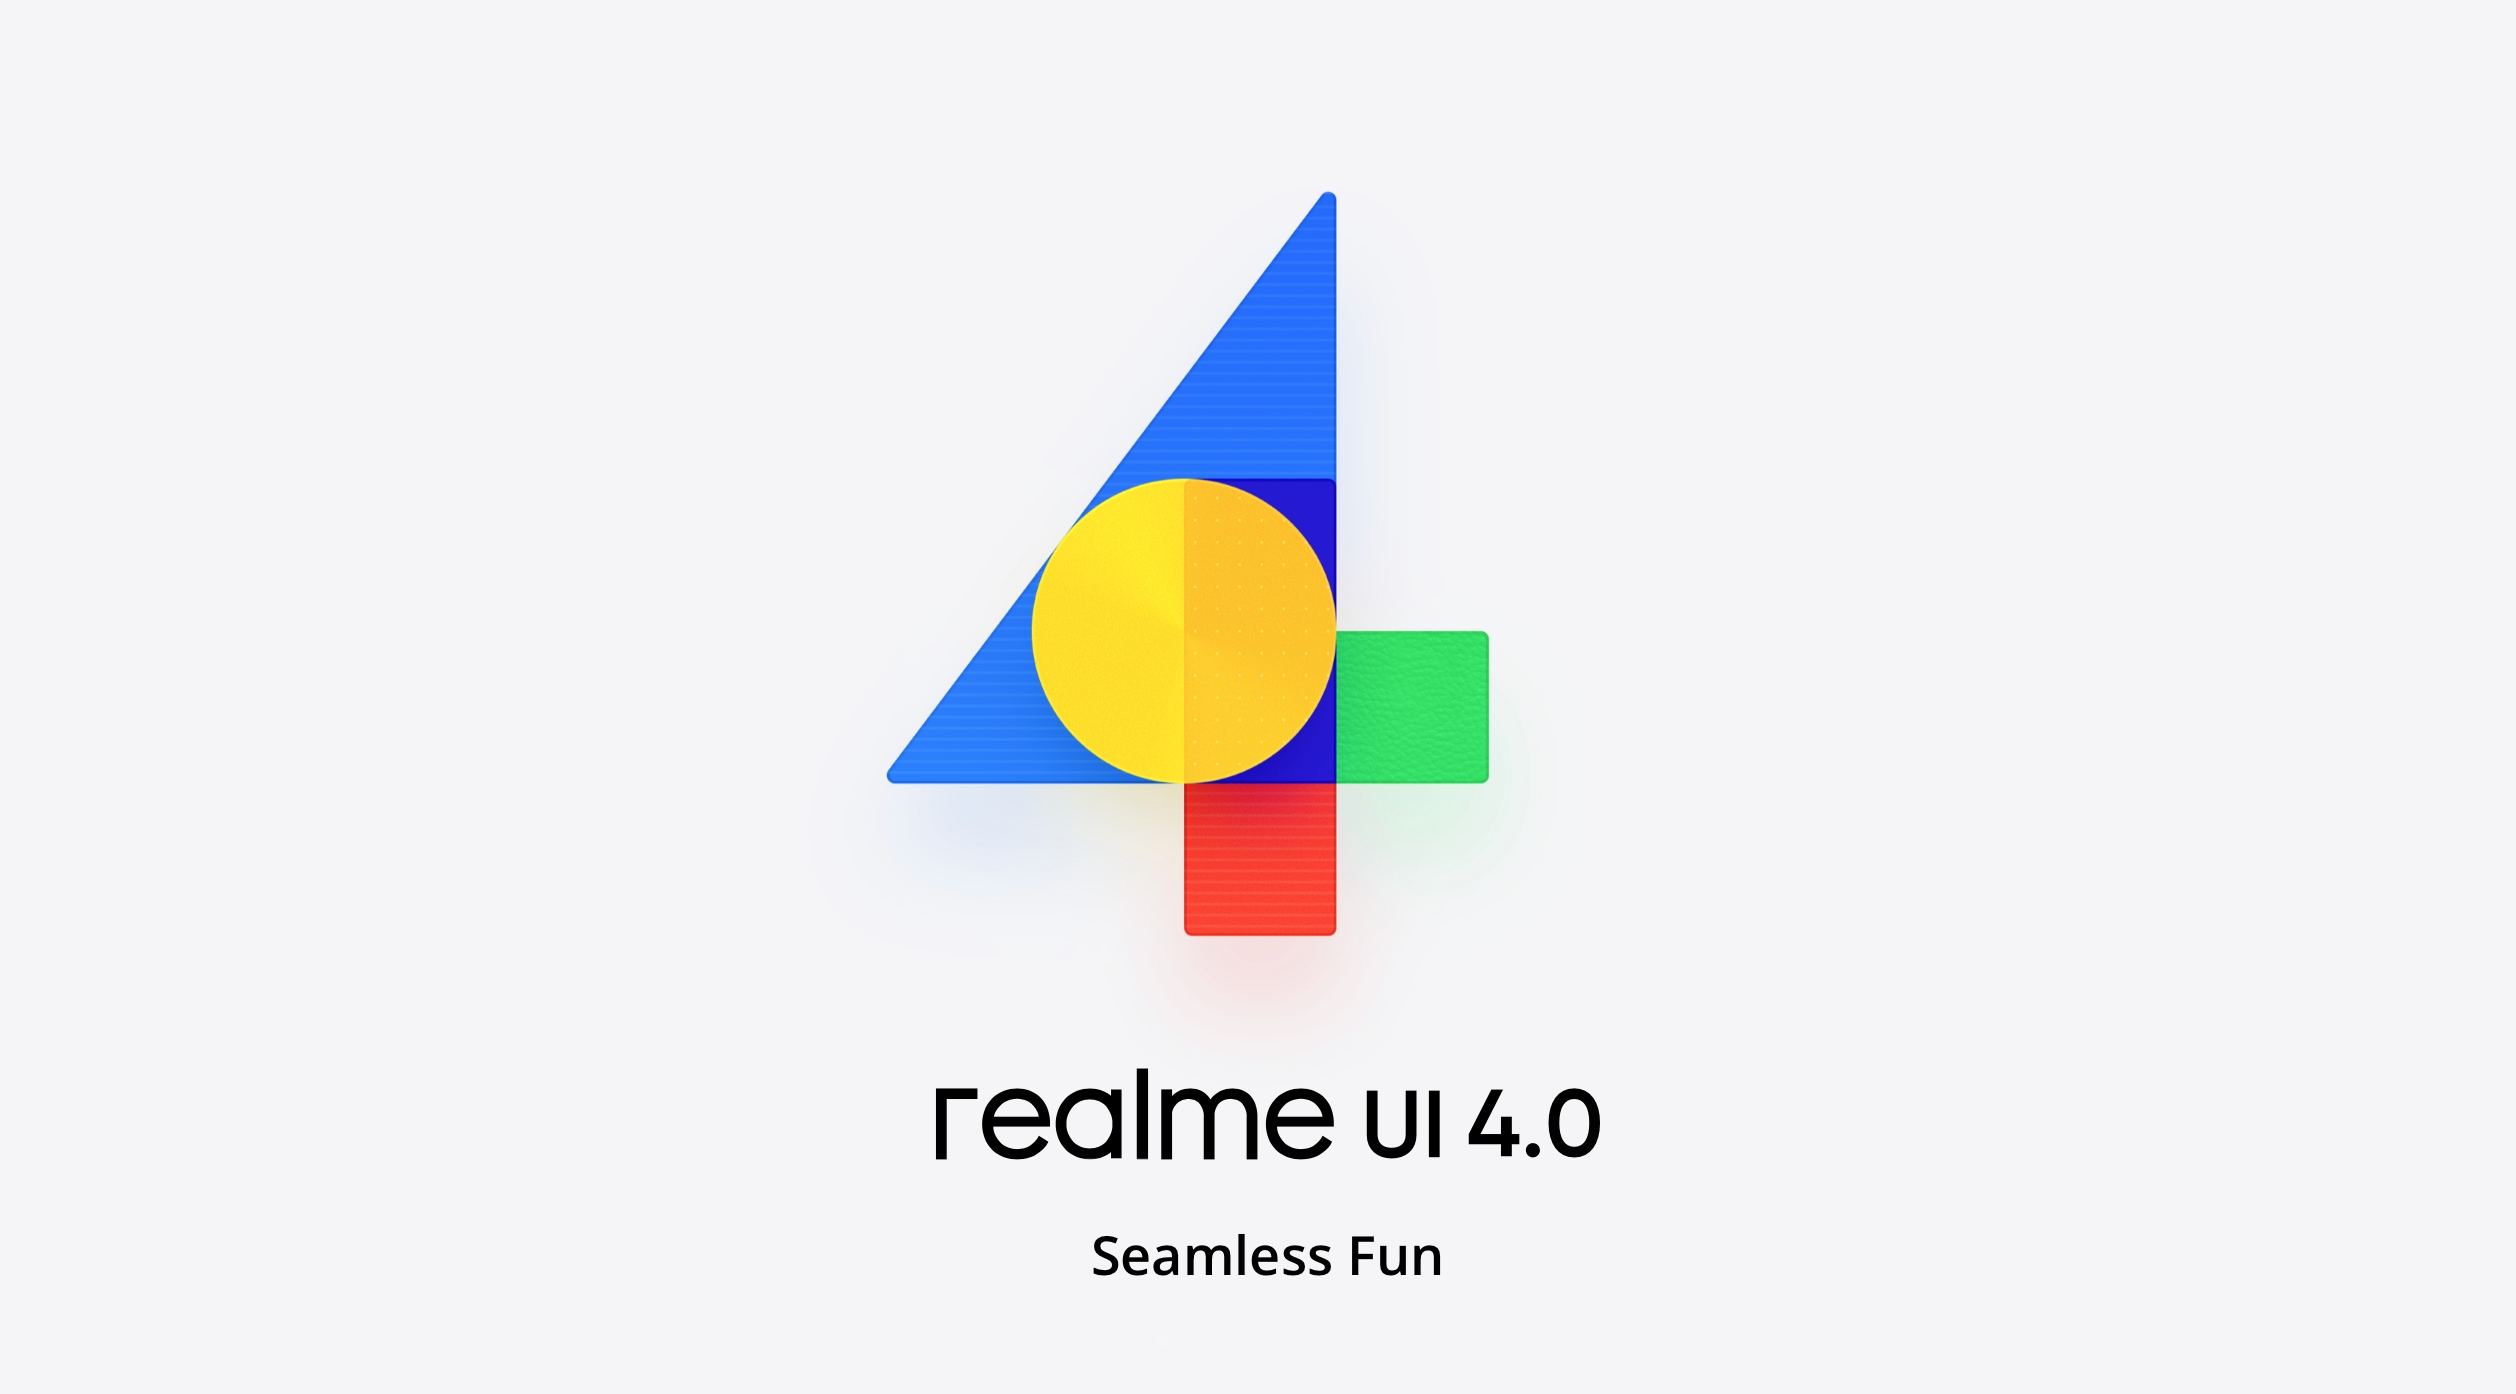 realme unveiled the realme UI 4.0 shell based on the Android 13 operating system